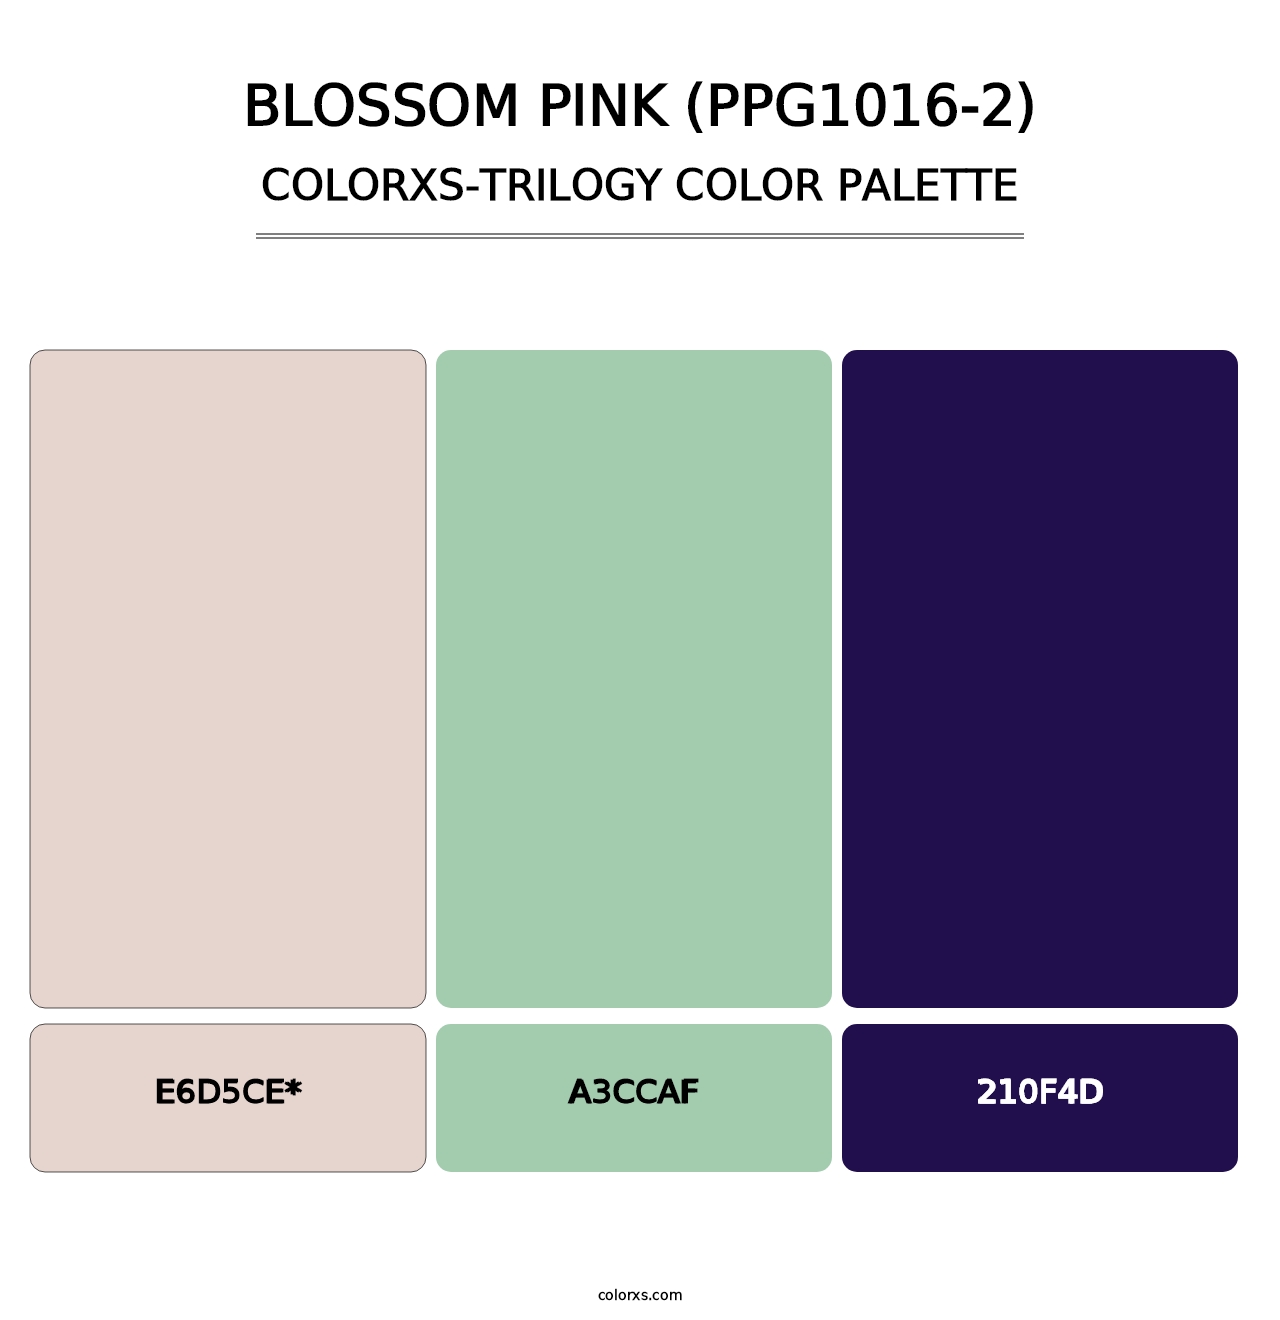 Blossom Pink (PPG1016-2) - Colorxs Trilogy Palette